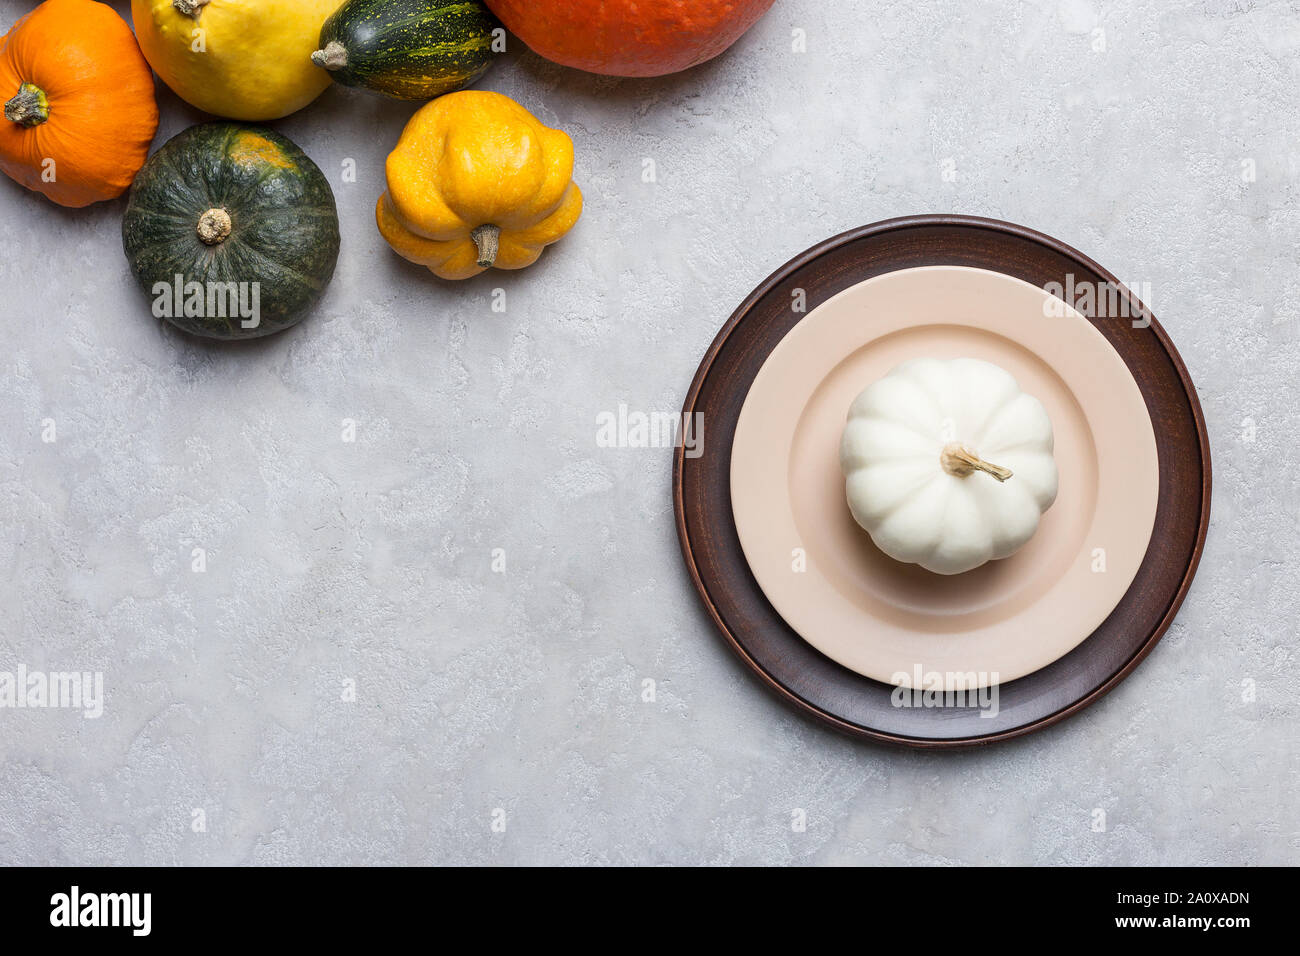 Serving plate with white pumpkin on empty plate. Different kind of pumpkins in the corner. Concept of crop, thanksgiving dinner and halloween serving Stock Photo